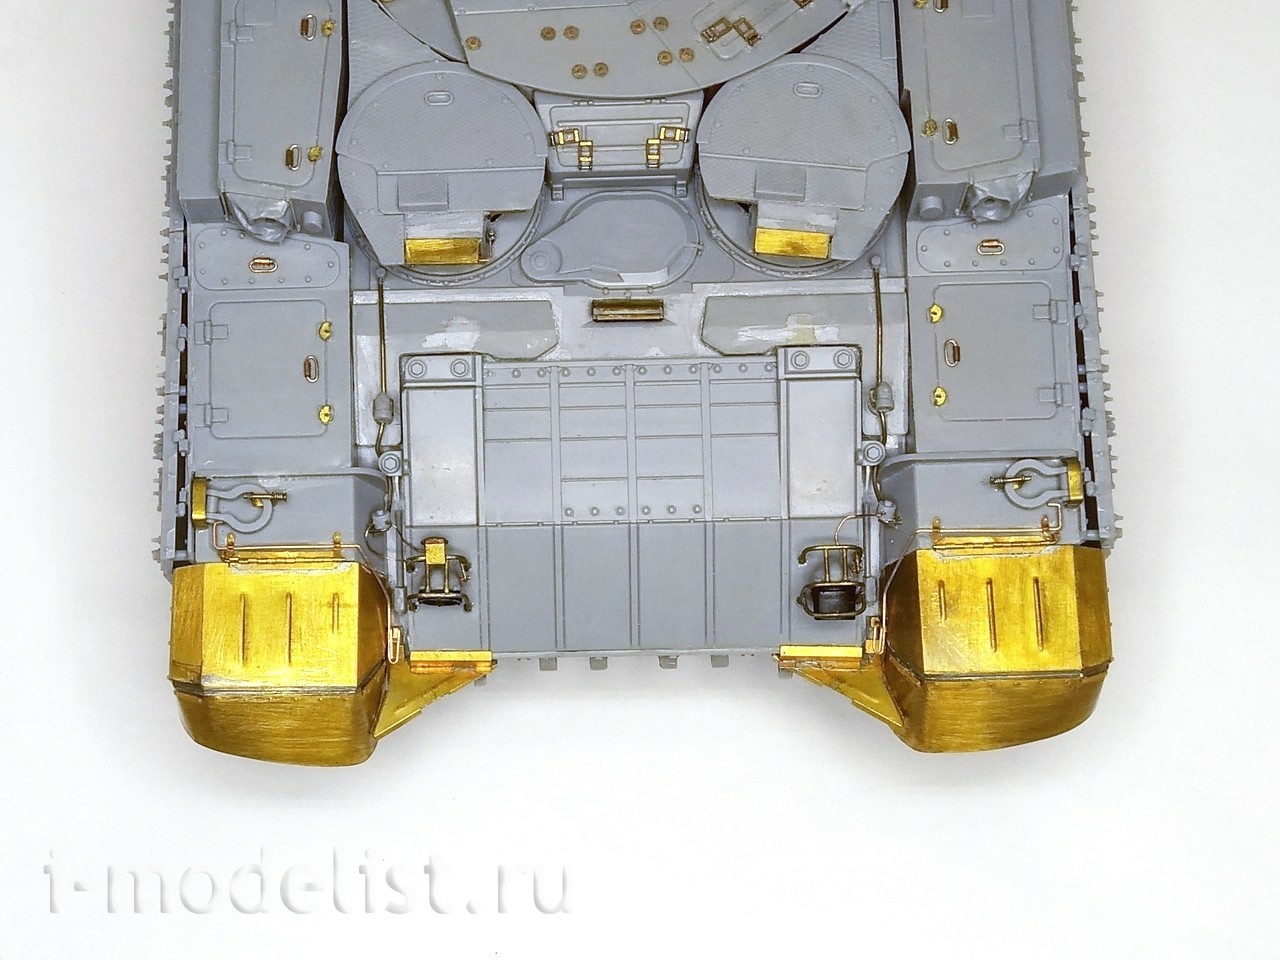 035330 Microdesign 1/35 Front mud flaps BMPT/MSTA